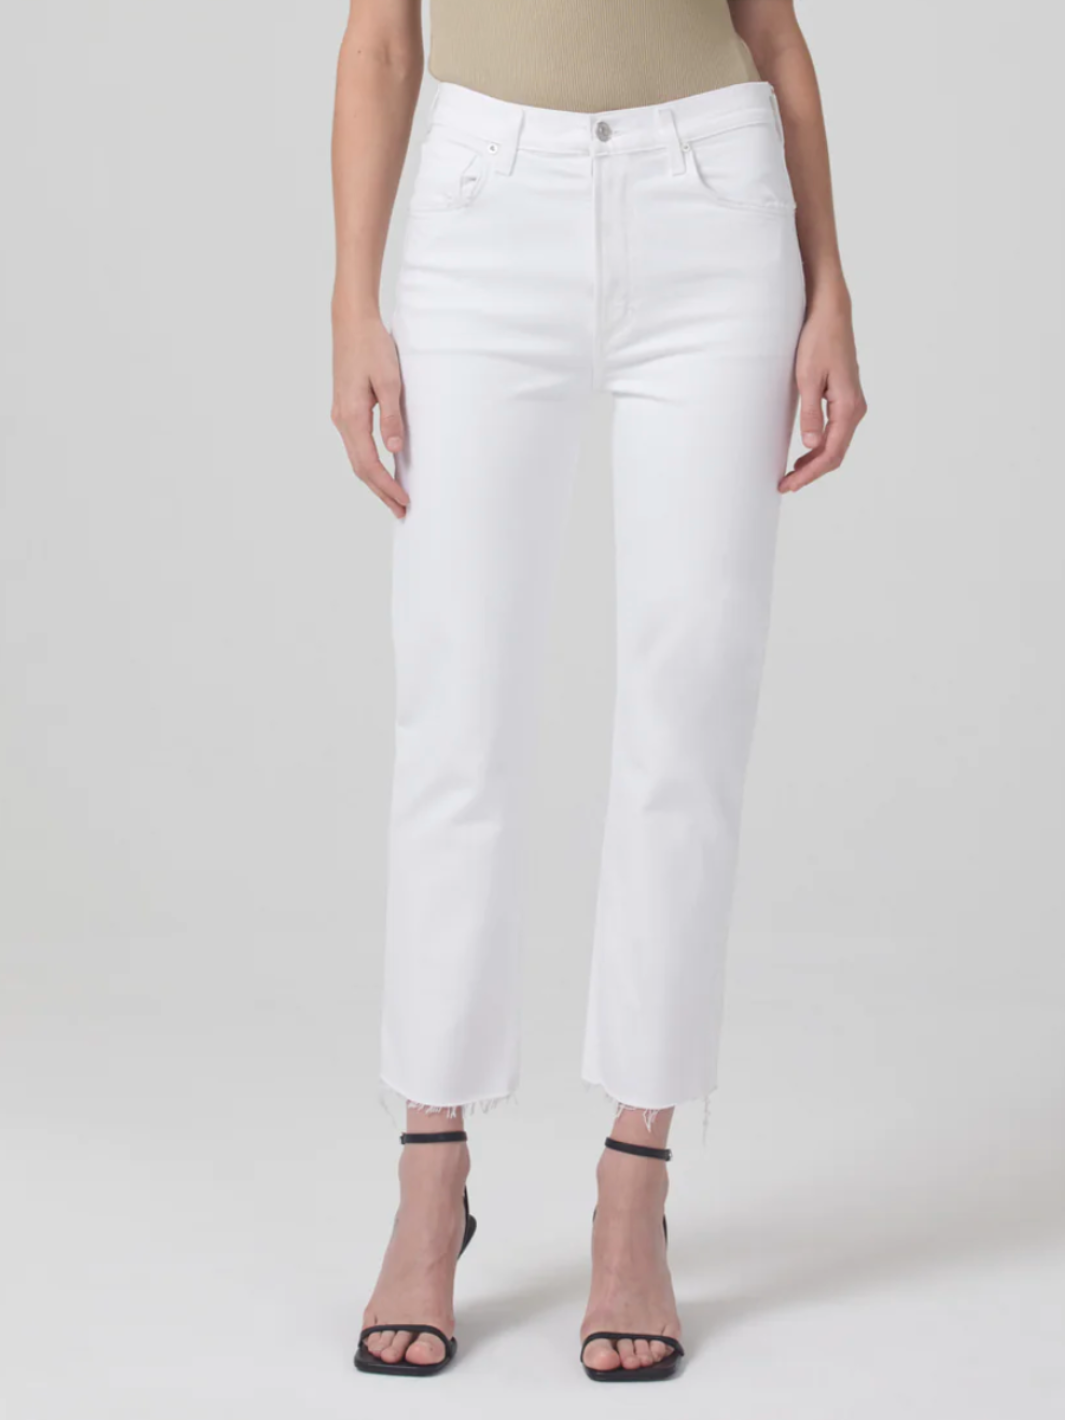 DAPHNE CROP HIGH RISE STOVEPIPE IN LUCENT - Romi Boutique